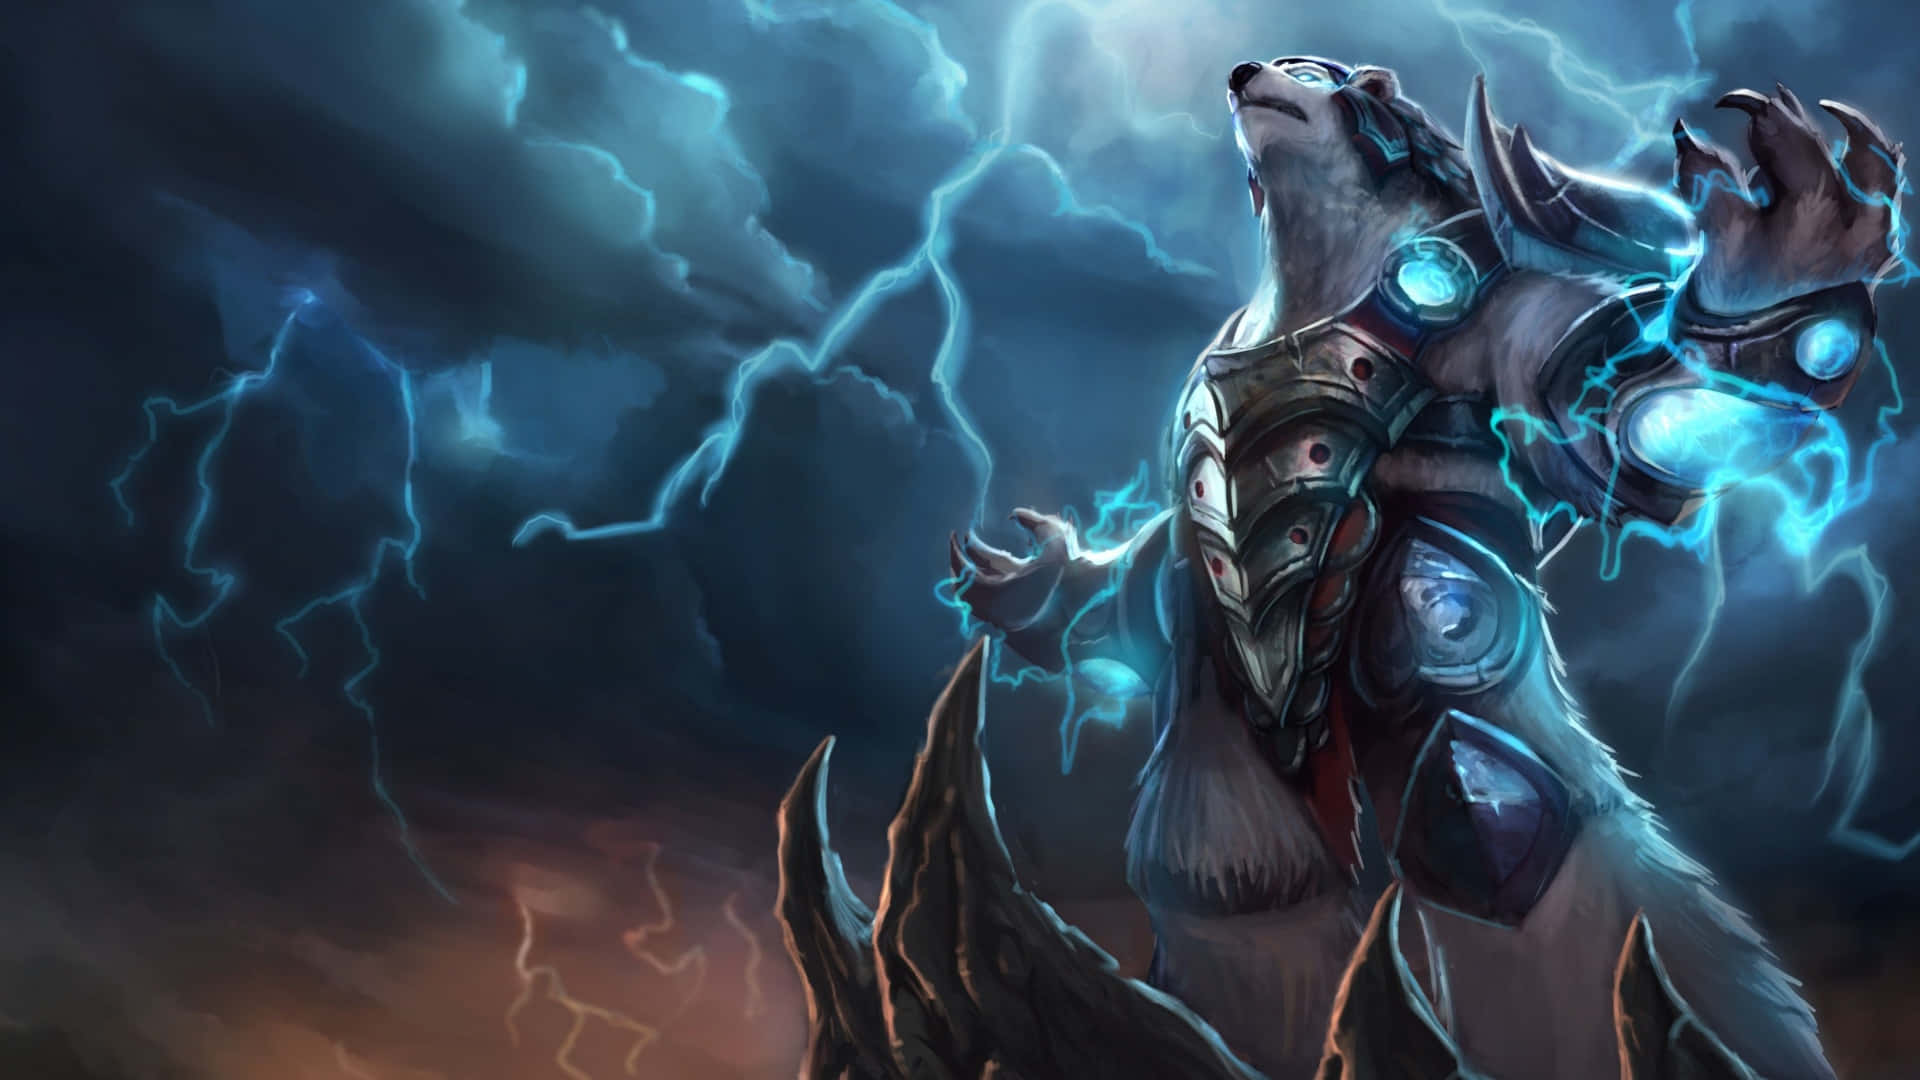 Summon your inner warrior and join the battle in League Of Legends